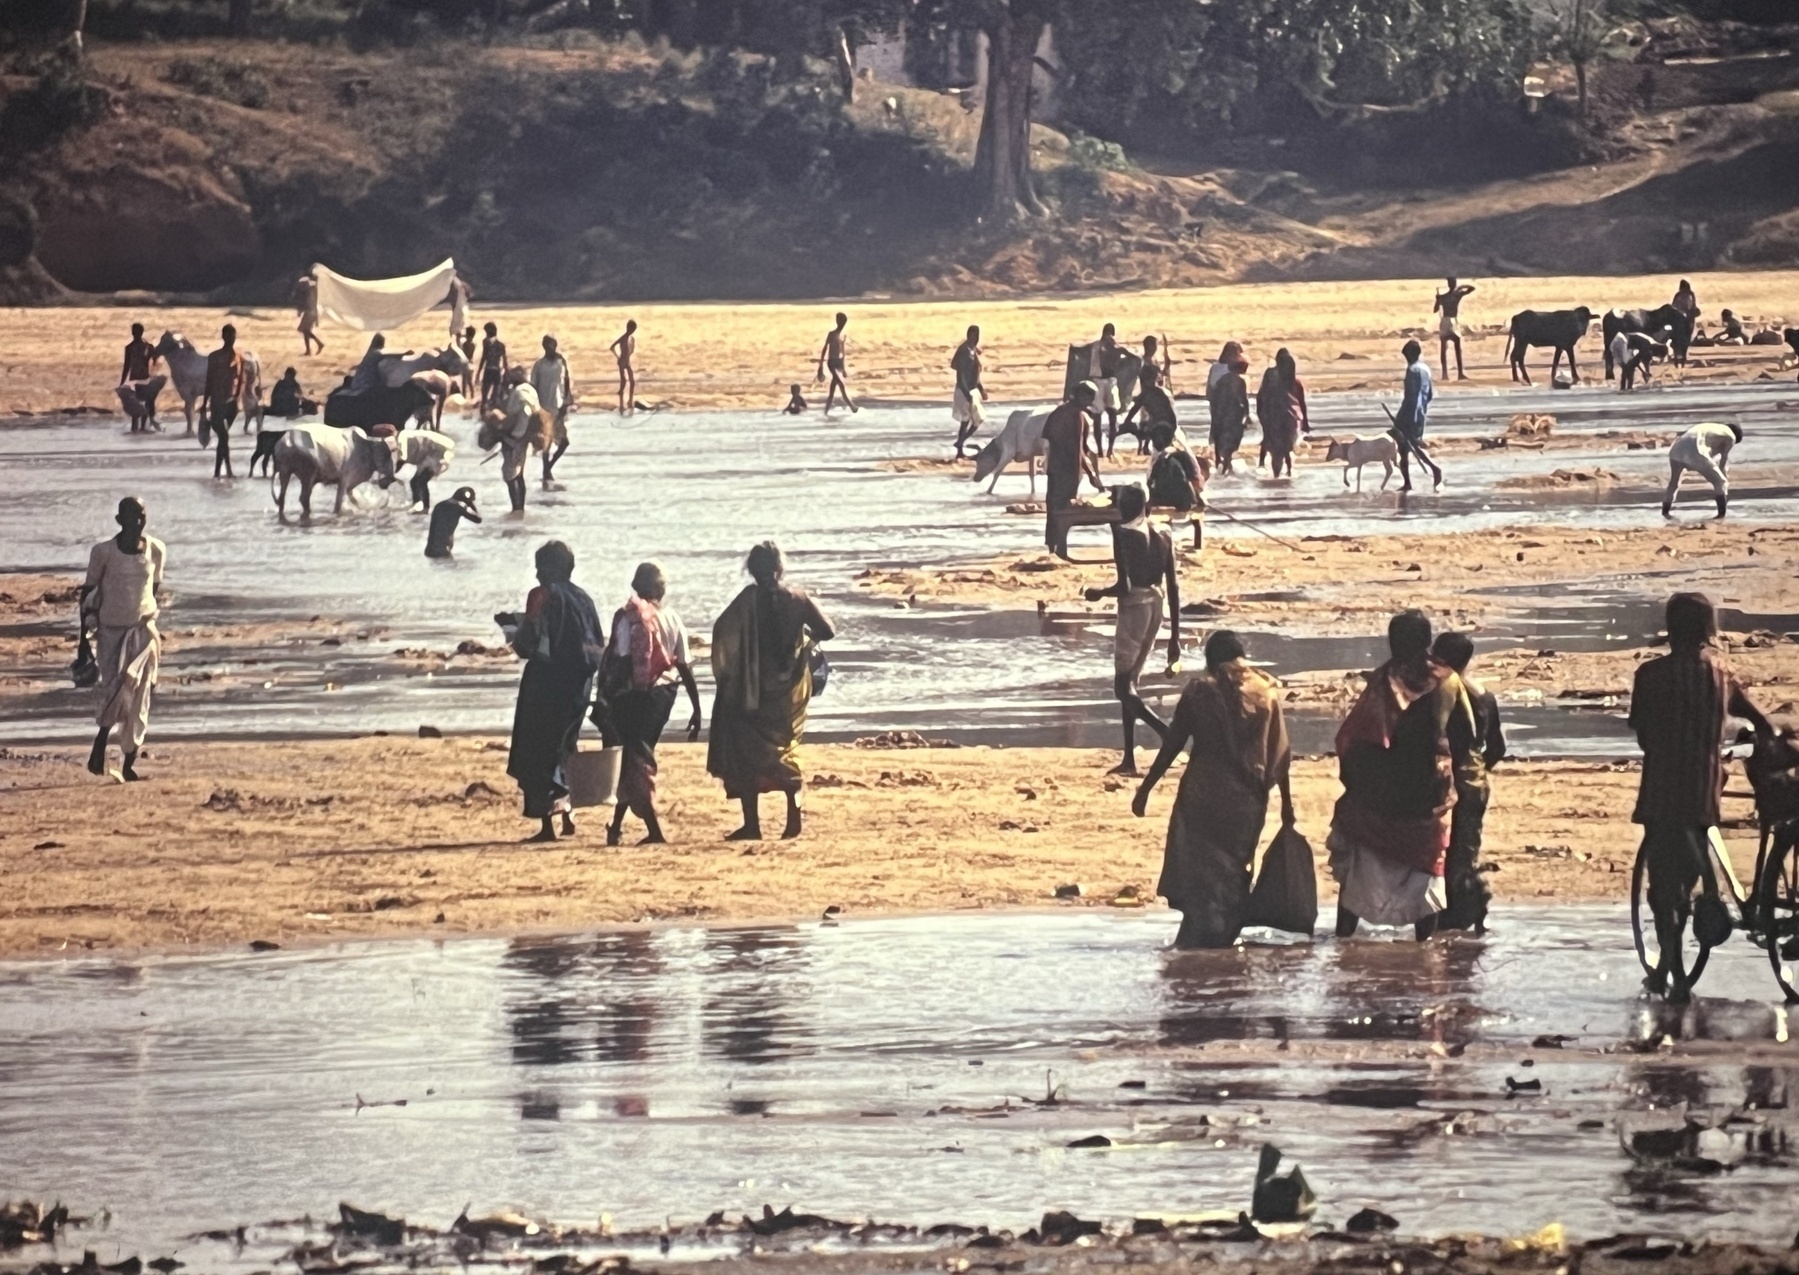 The Phalgu River in the Indian city of Gaya. The mostly dried up river is now a series of small rivers and puddles. People cross singularly and in groups, some pushing bicycles, some carrying baskets, sacks and other goods. Cows are also in the river, old and young. A couple of people are bathing. Some are washing clothes